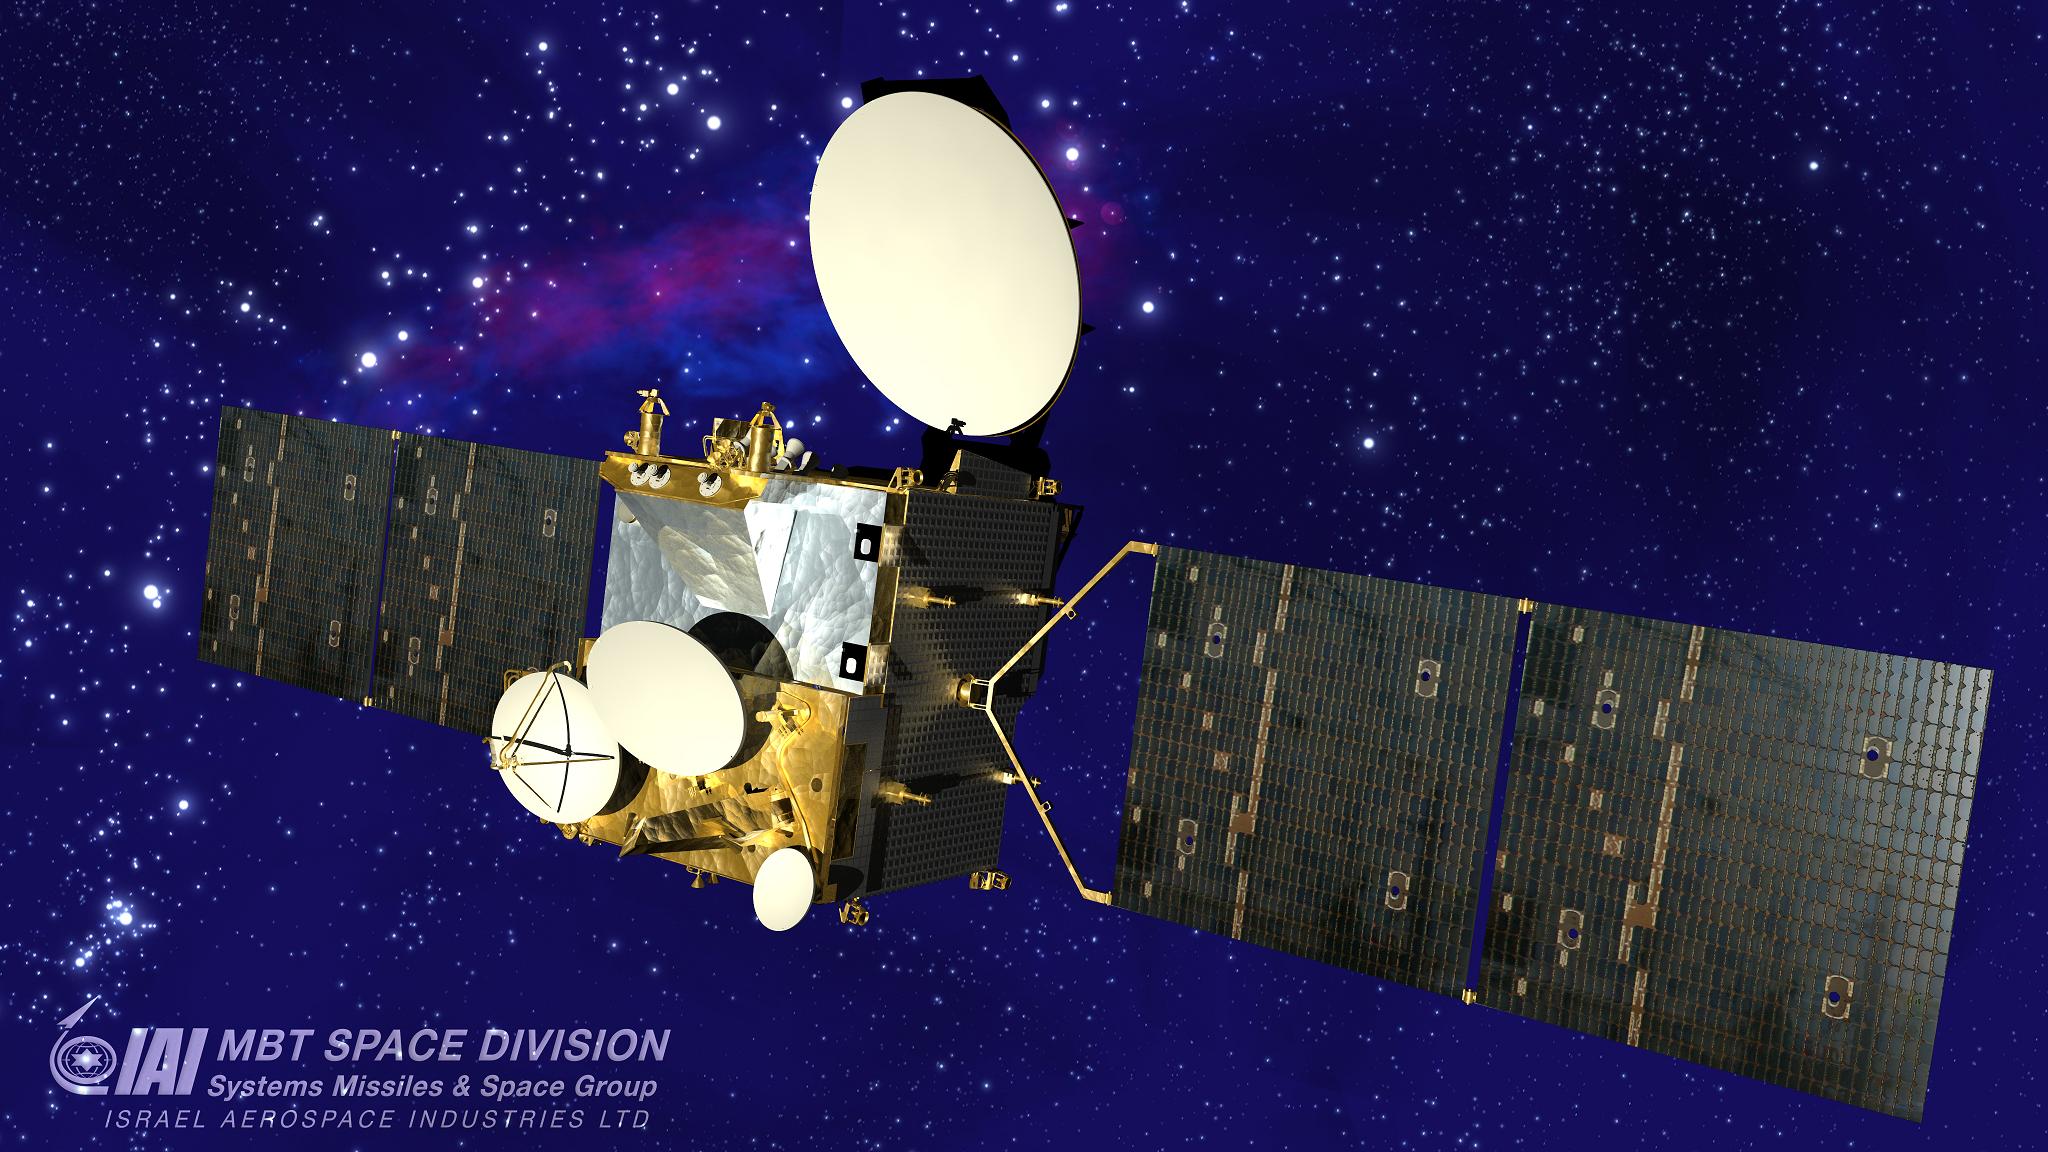 The Amos 3 satellite serving Israel and Europe. Amos 5 will serve Africa. Illustration: Communication space